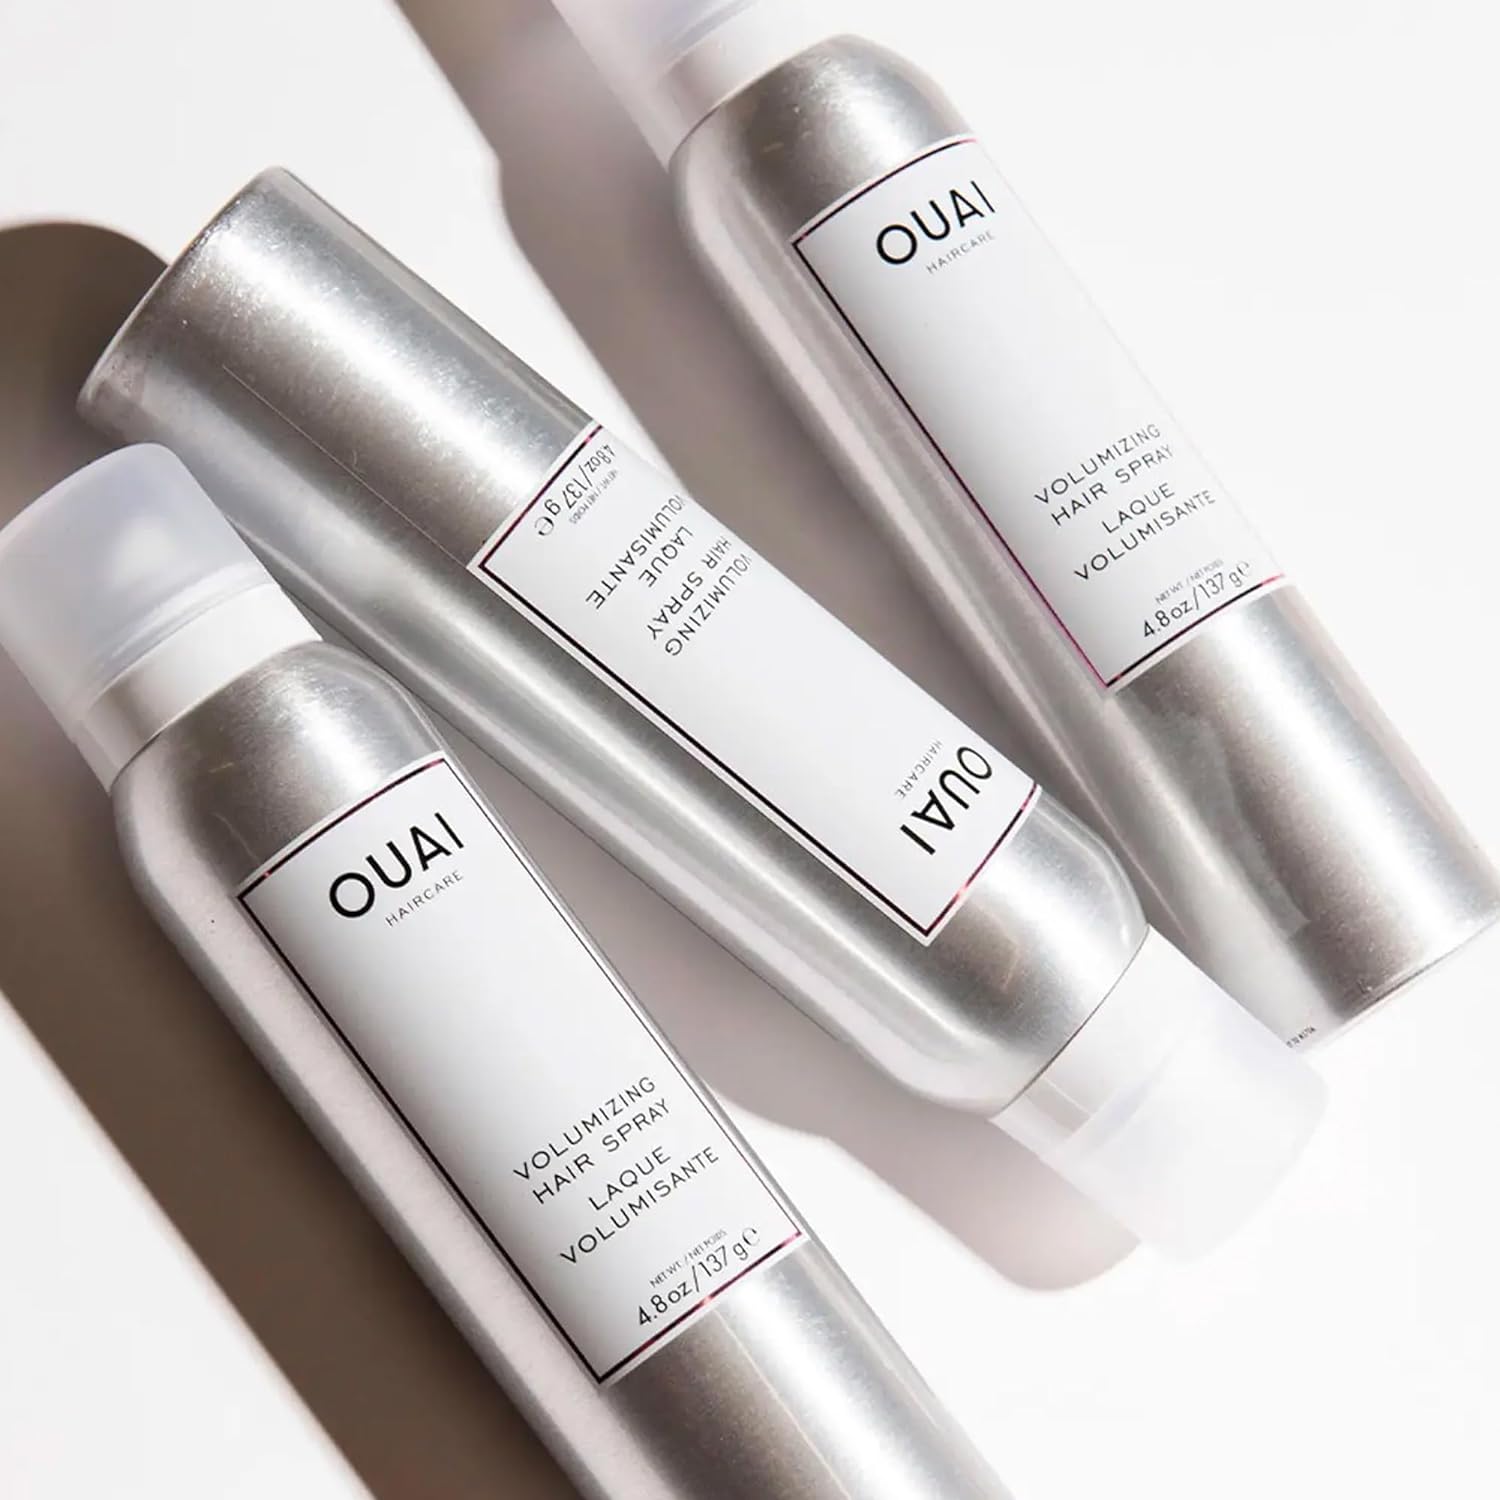 OUAI Texturizing Hair Spray. Add Texture and Volume While Absorbing Oil. Part Hair Spray, Part Dry Shampoo, the Spray Instantly Refreshes Hair. Free from Parabens and Sulfates (4.6 Oz) : Beauty & Personal Care